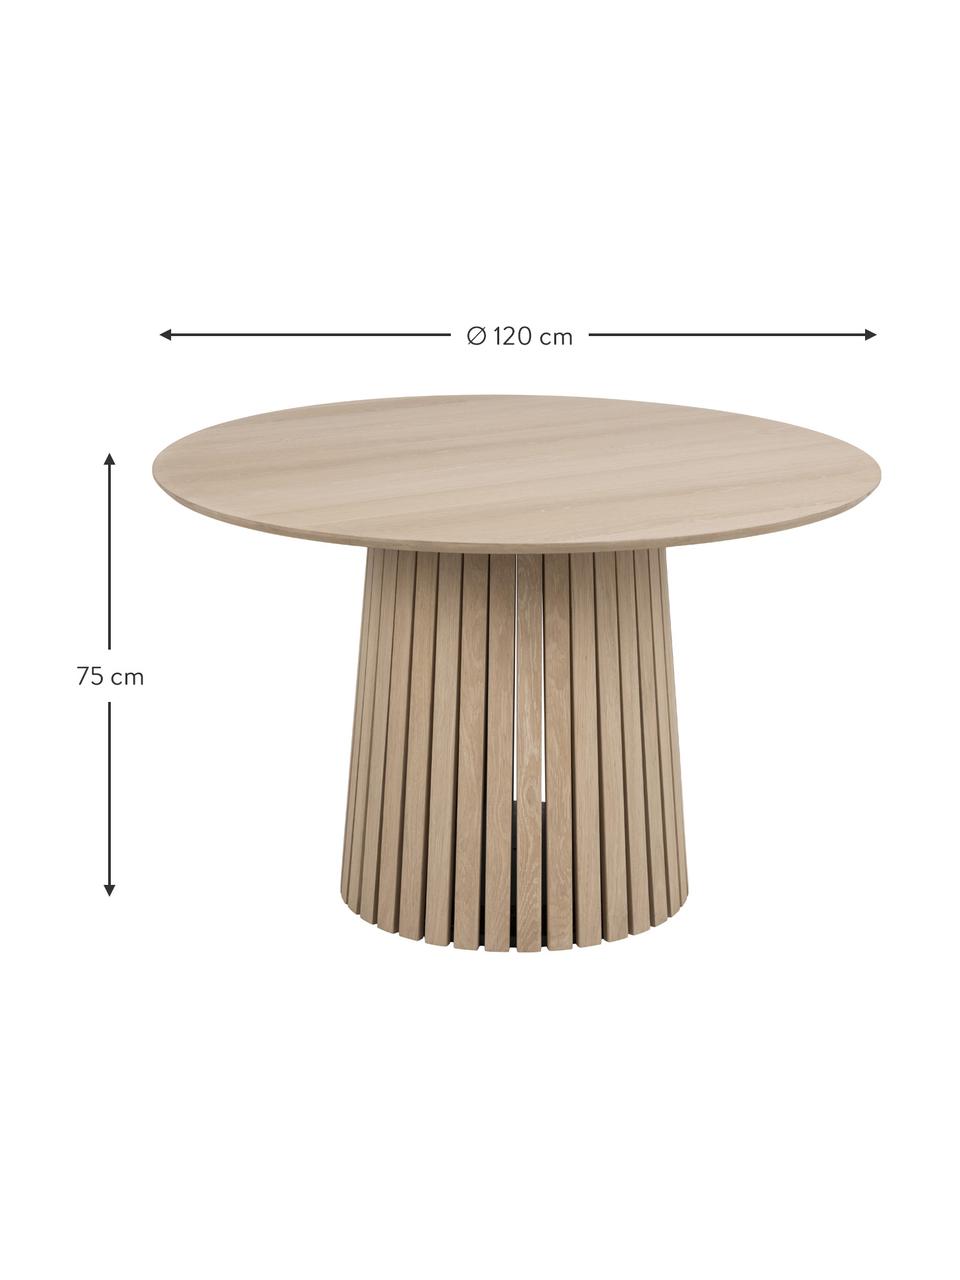 Ronde eettafel Christo hout, Ø 120 cm | Westwing